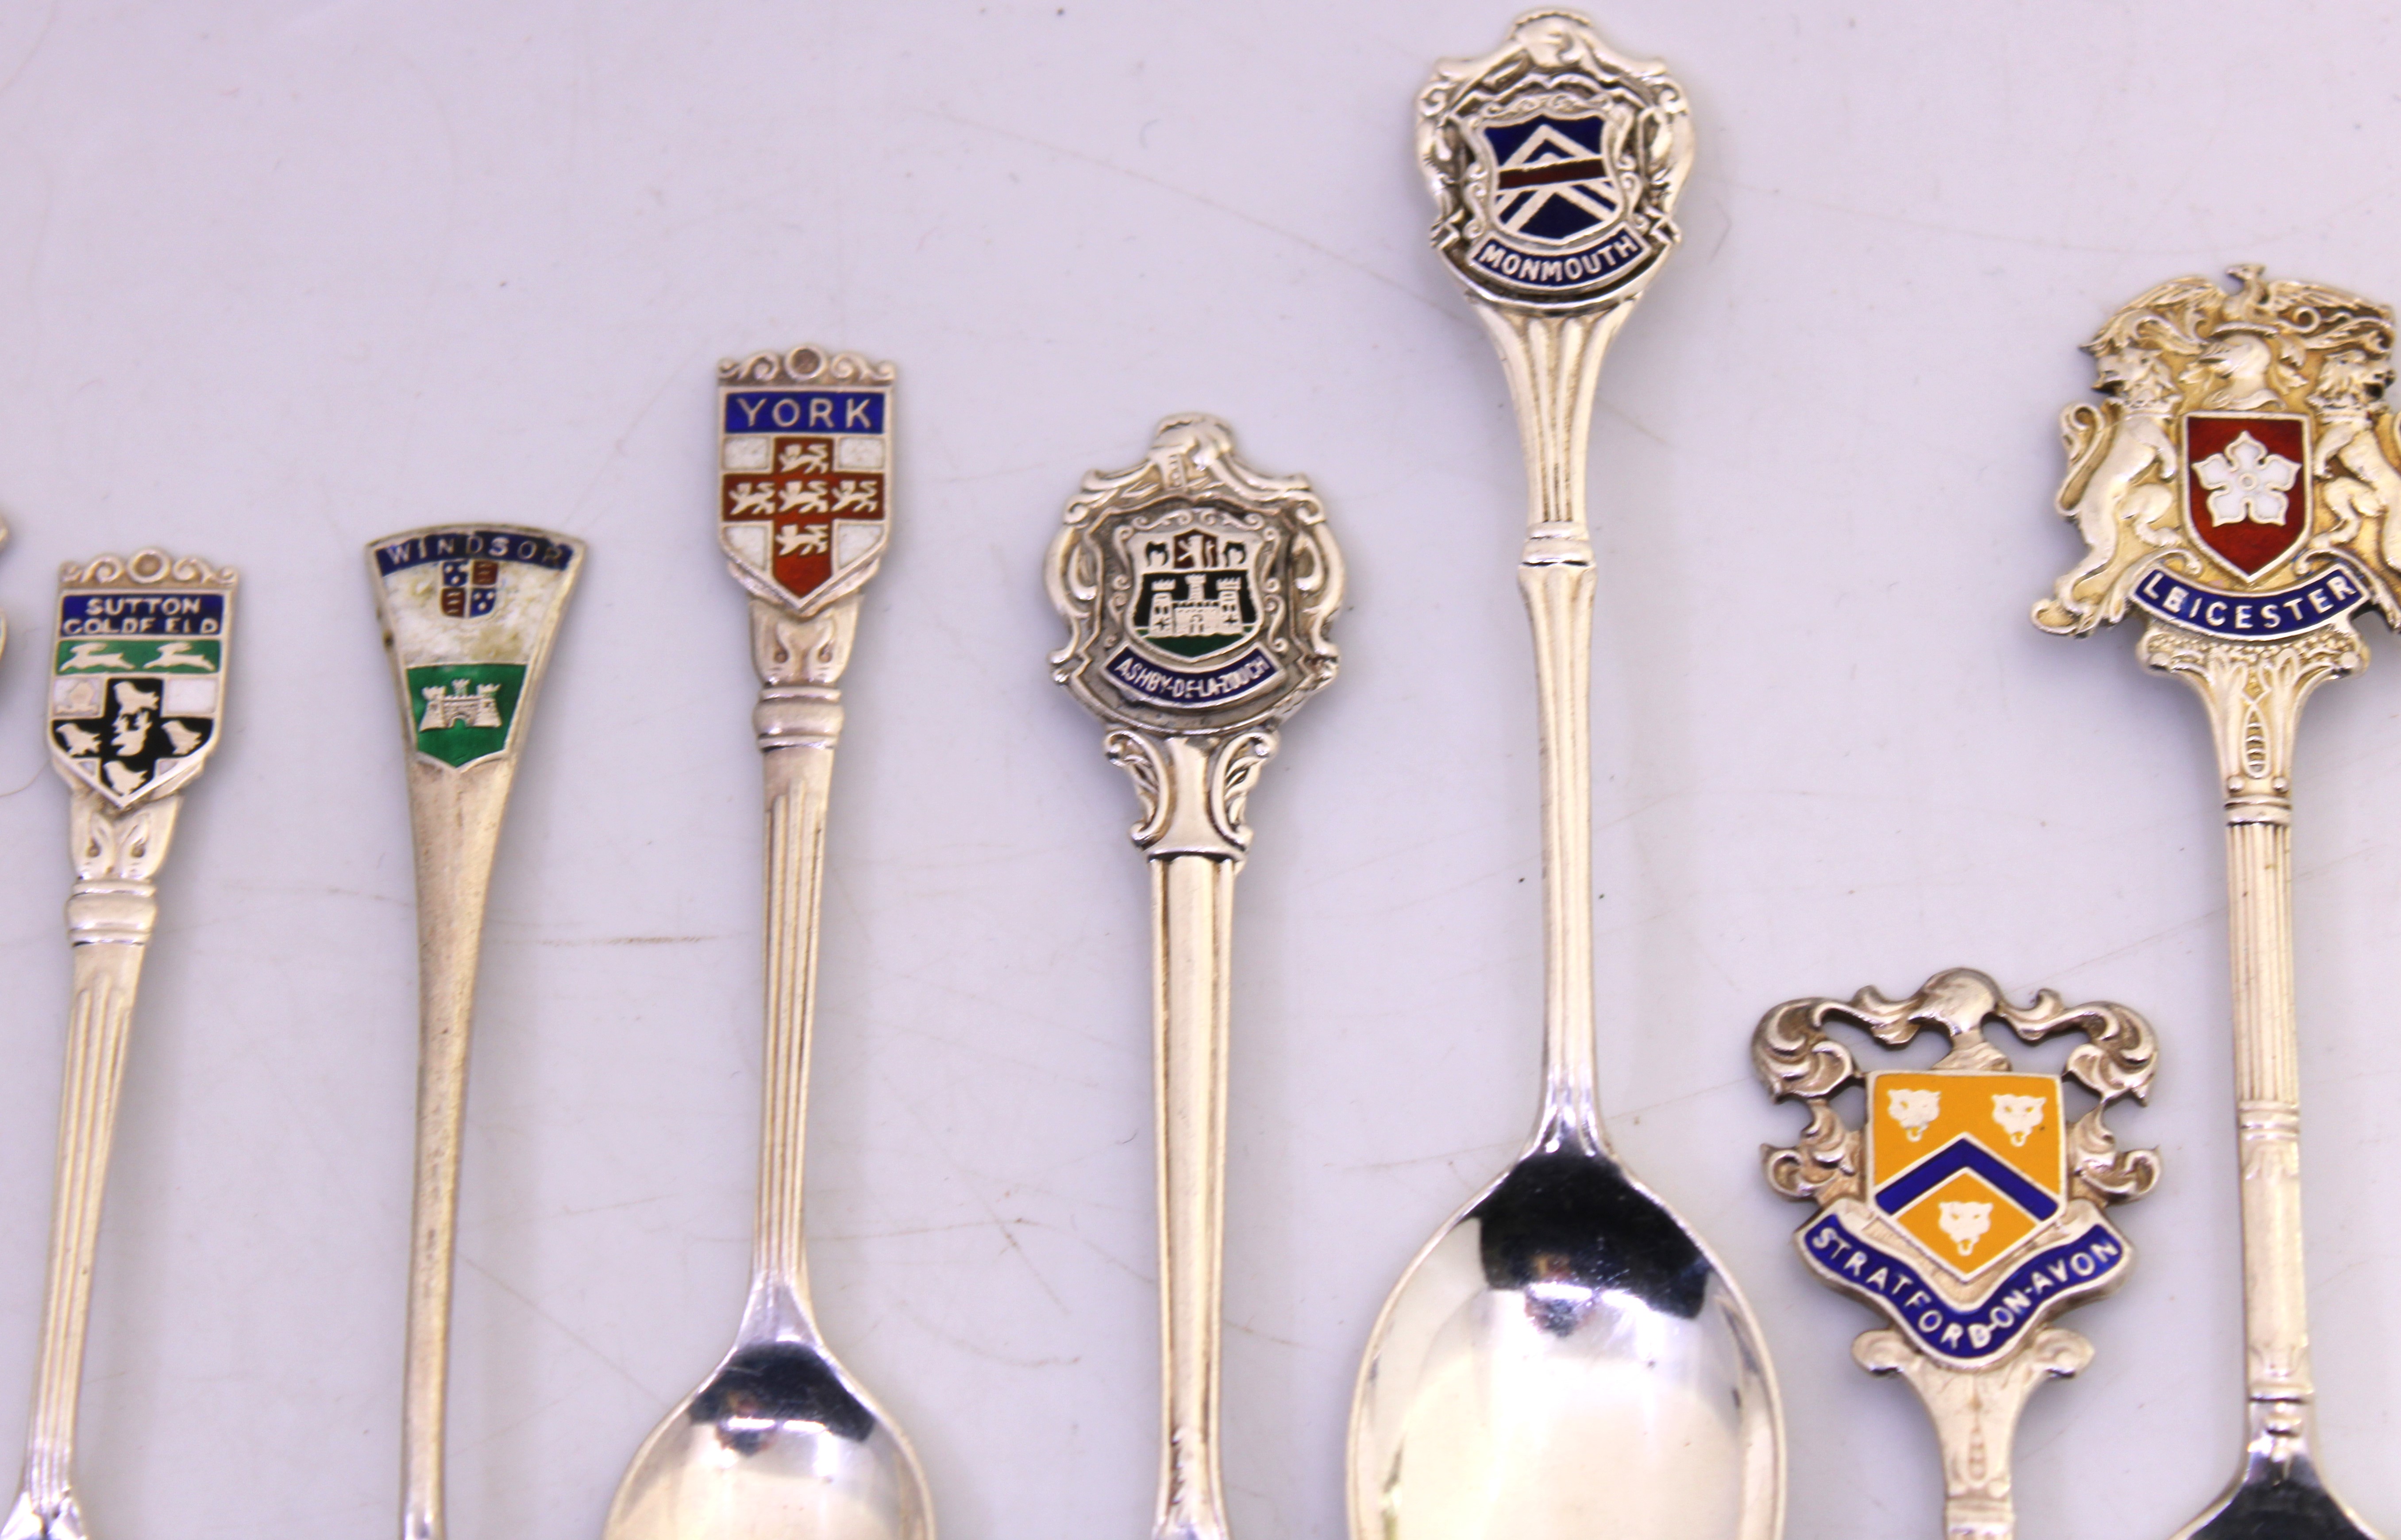 Selection of Sterling Silver Crested Teaspoons, EPNS Teaspoons, Commemorative Coins and a - Image 5 of 7